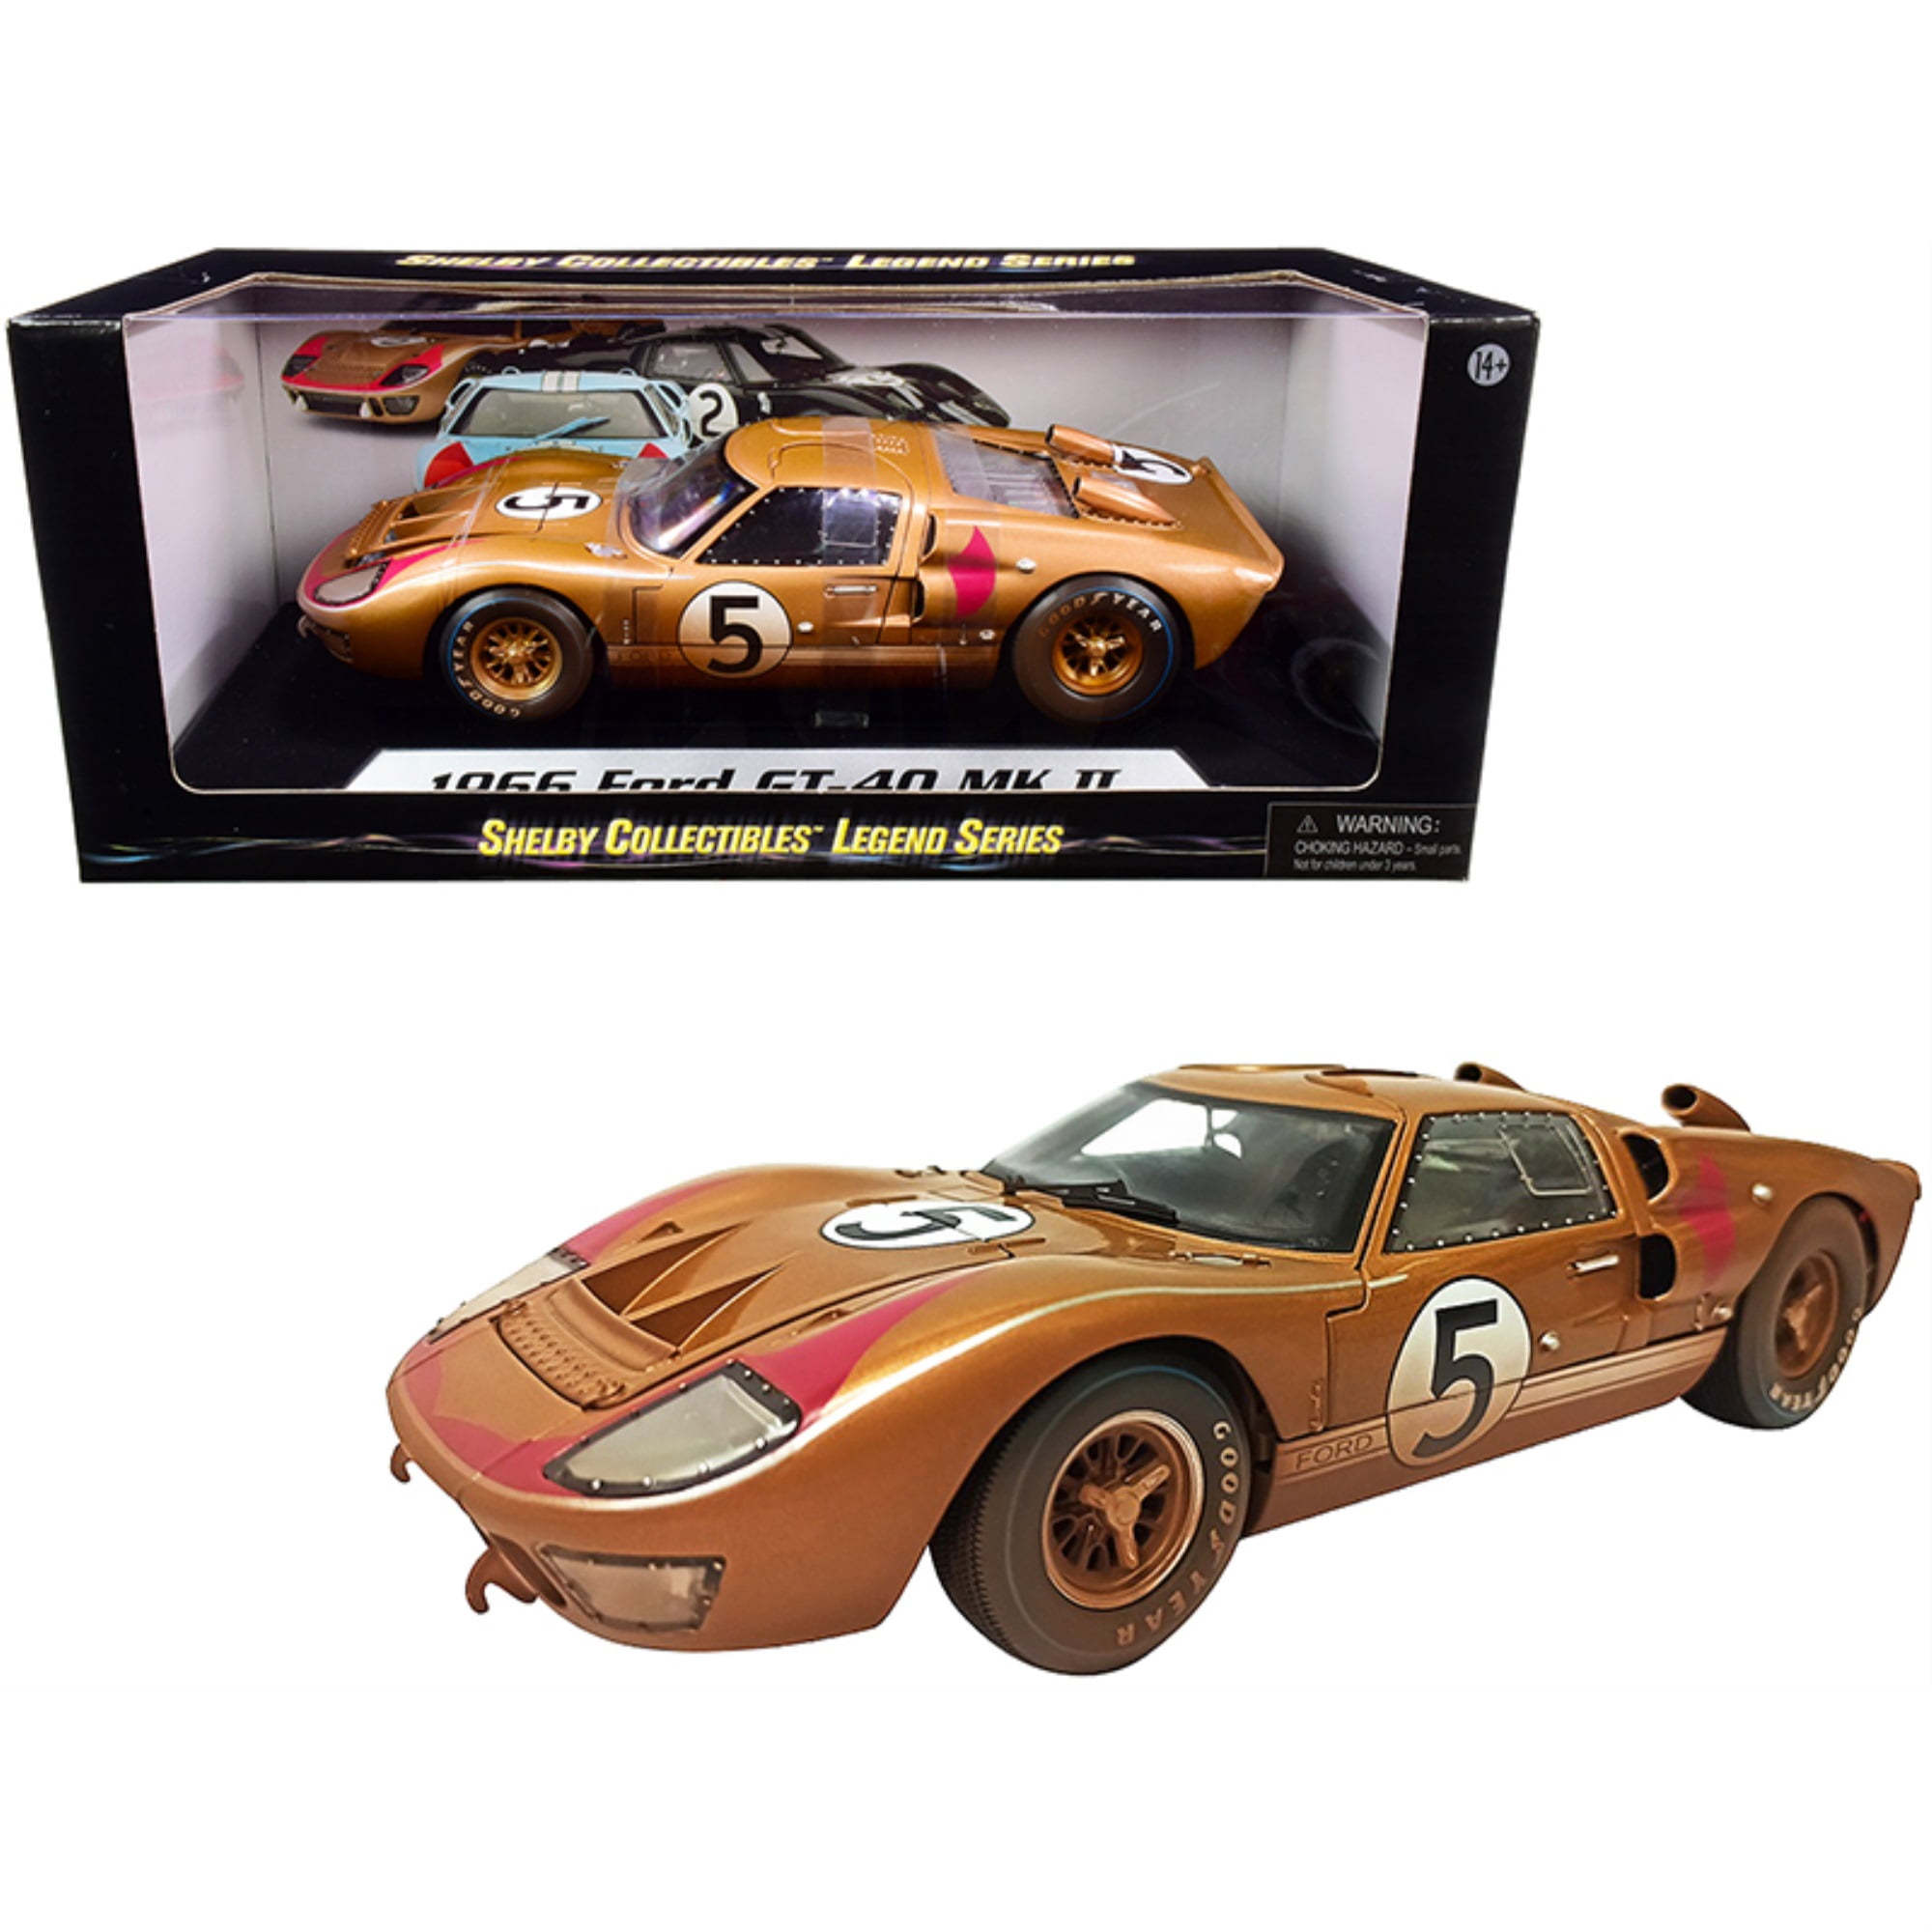 SC430 1966 Ford GT-40 MK II No.5 Gold After Race Dirty Version 1 by 18 Scale Diecast Model Car -  SHELBY COLLECTIBLES